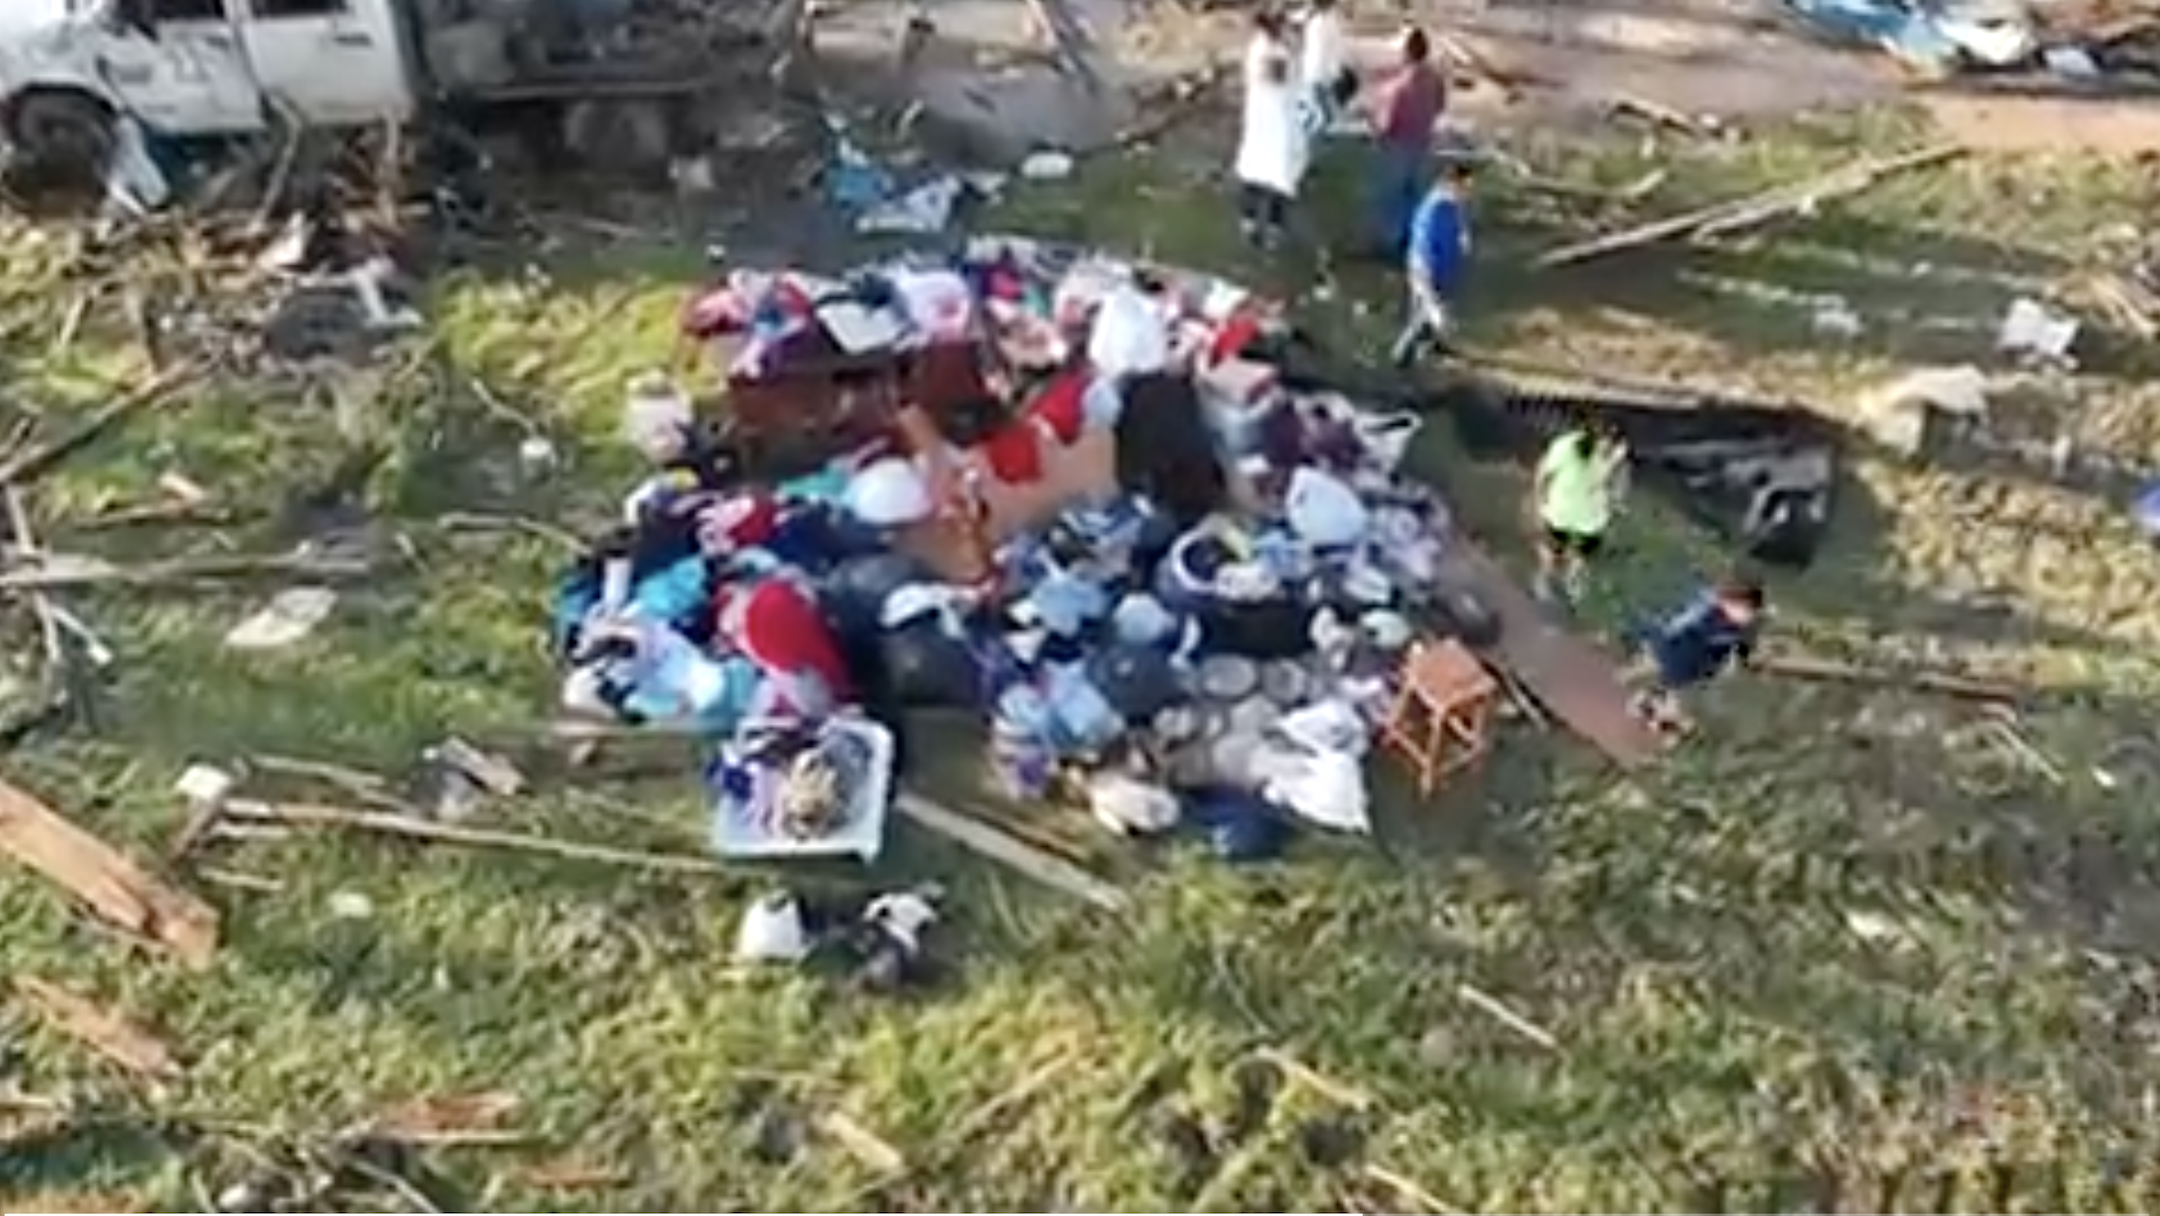 Overhead shot of people standing on the grass with their belongings amid debris